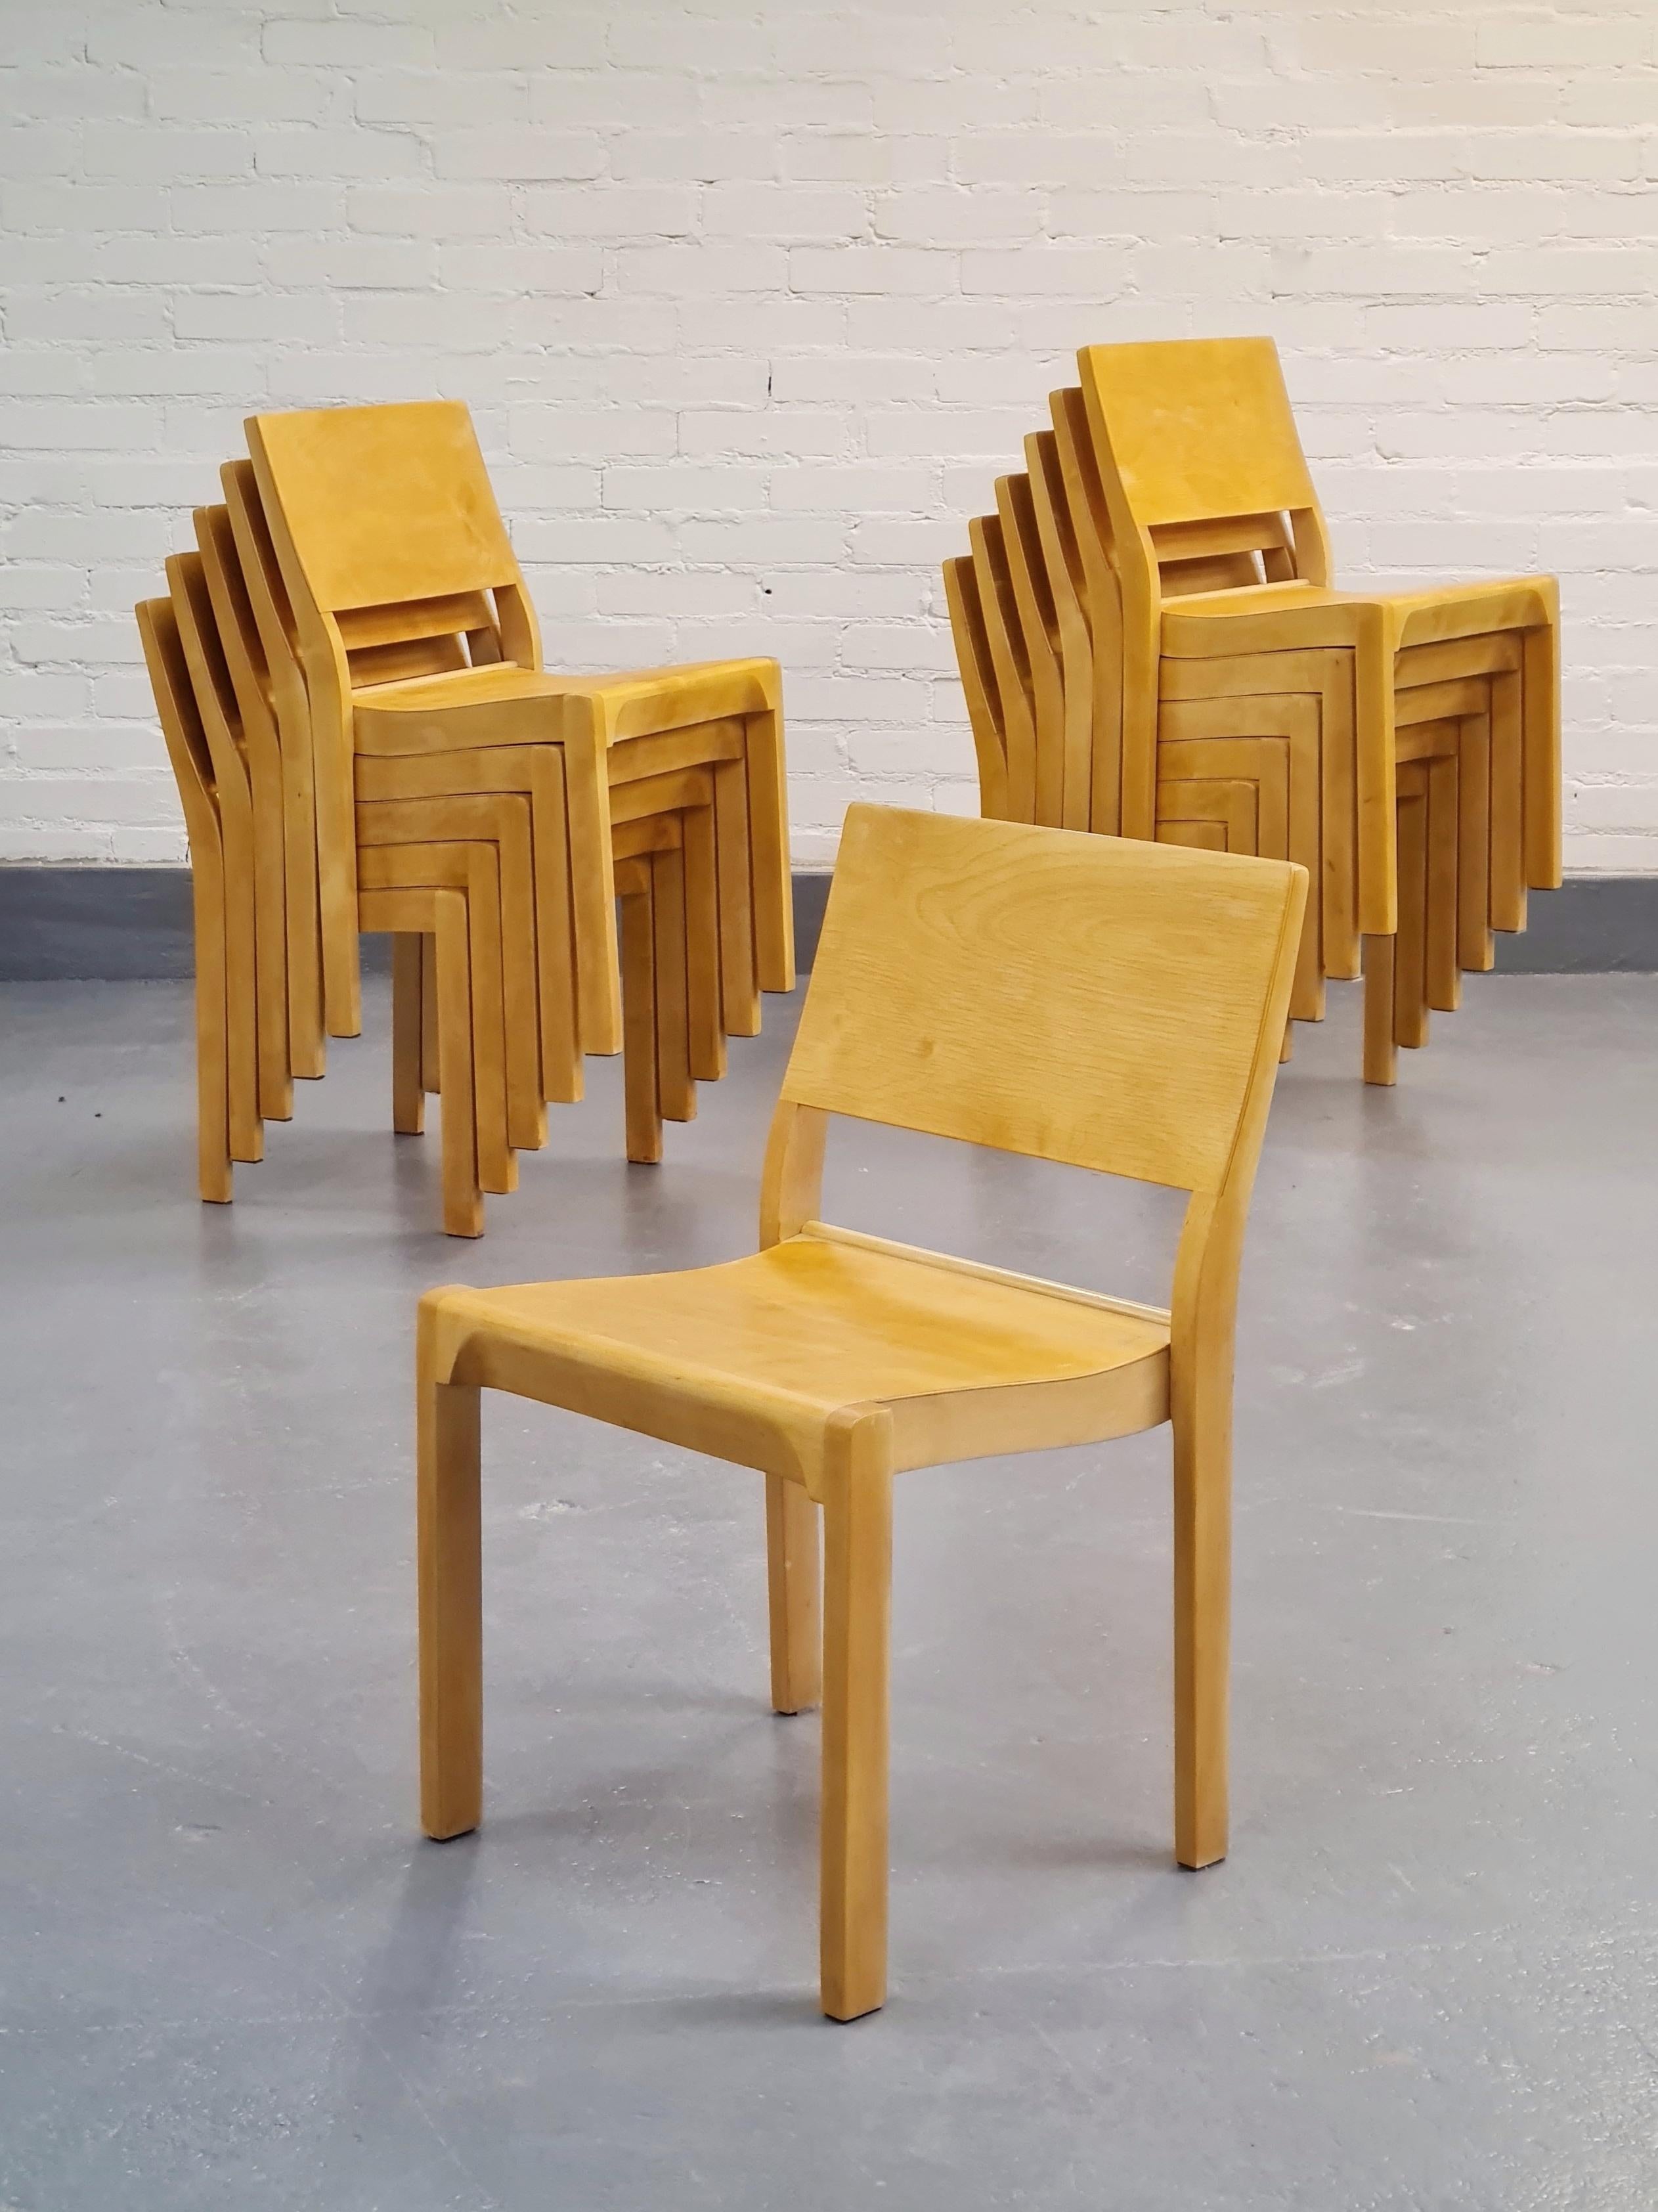 This chair was first designed in 1929 by Alvar Aalto in collobaration with the carpenter Otto Korhonen. This stackable model suited big halls and public places, restaurants, cafes and churches for example as well as single homes or flats.
It is